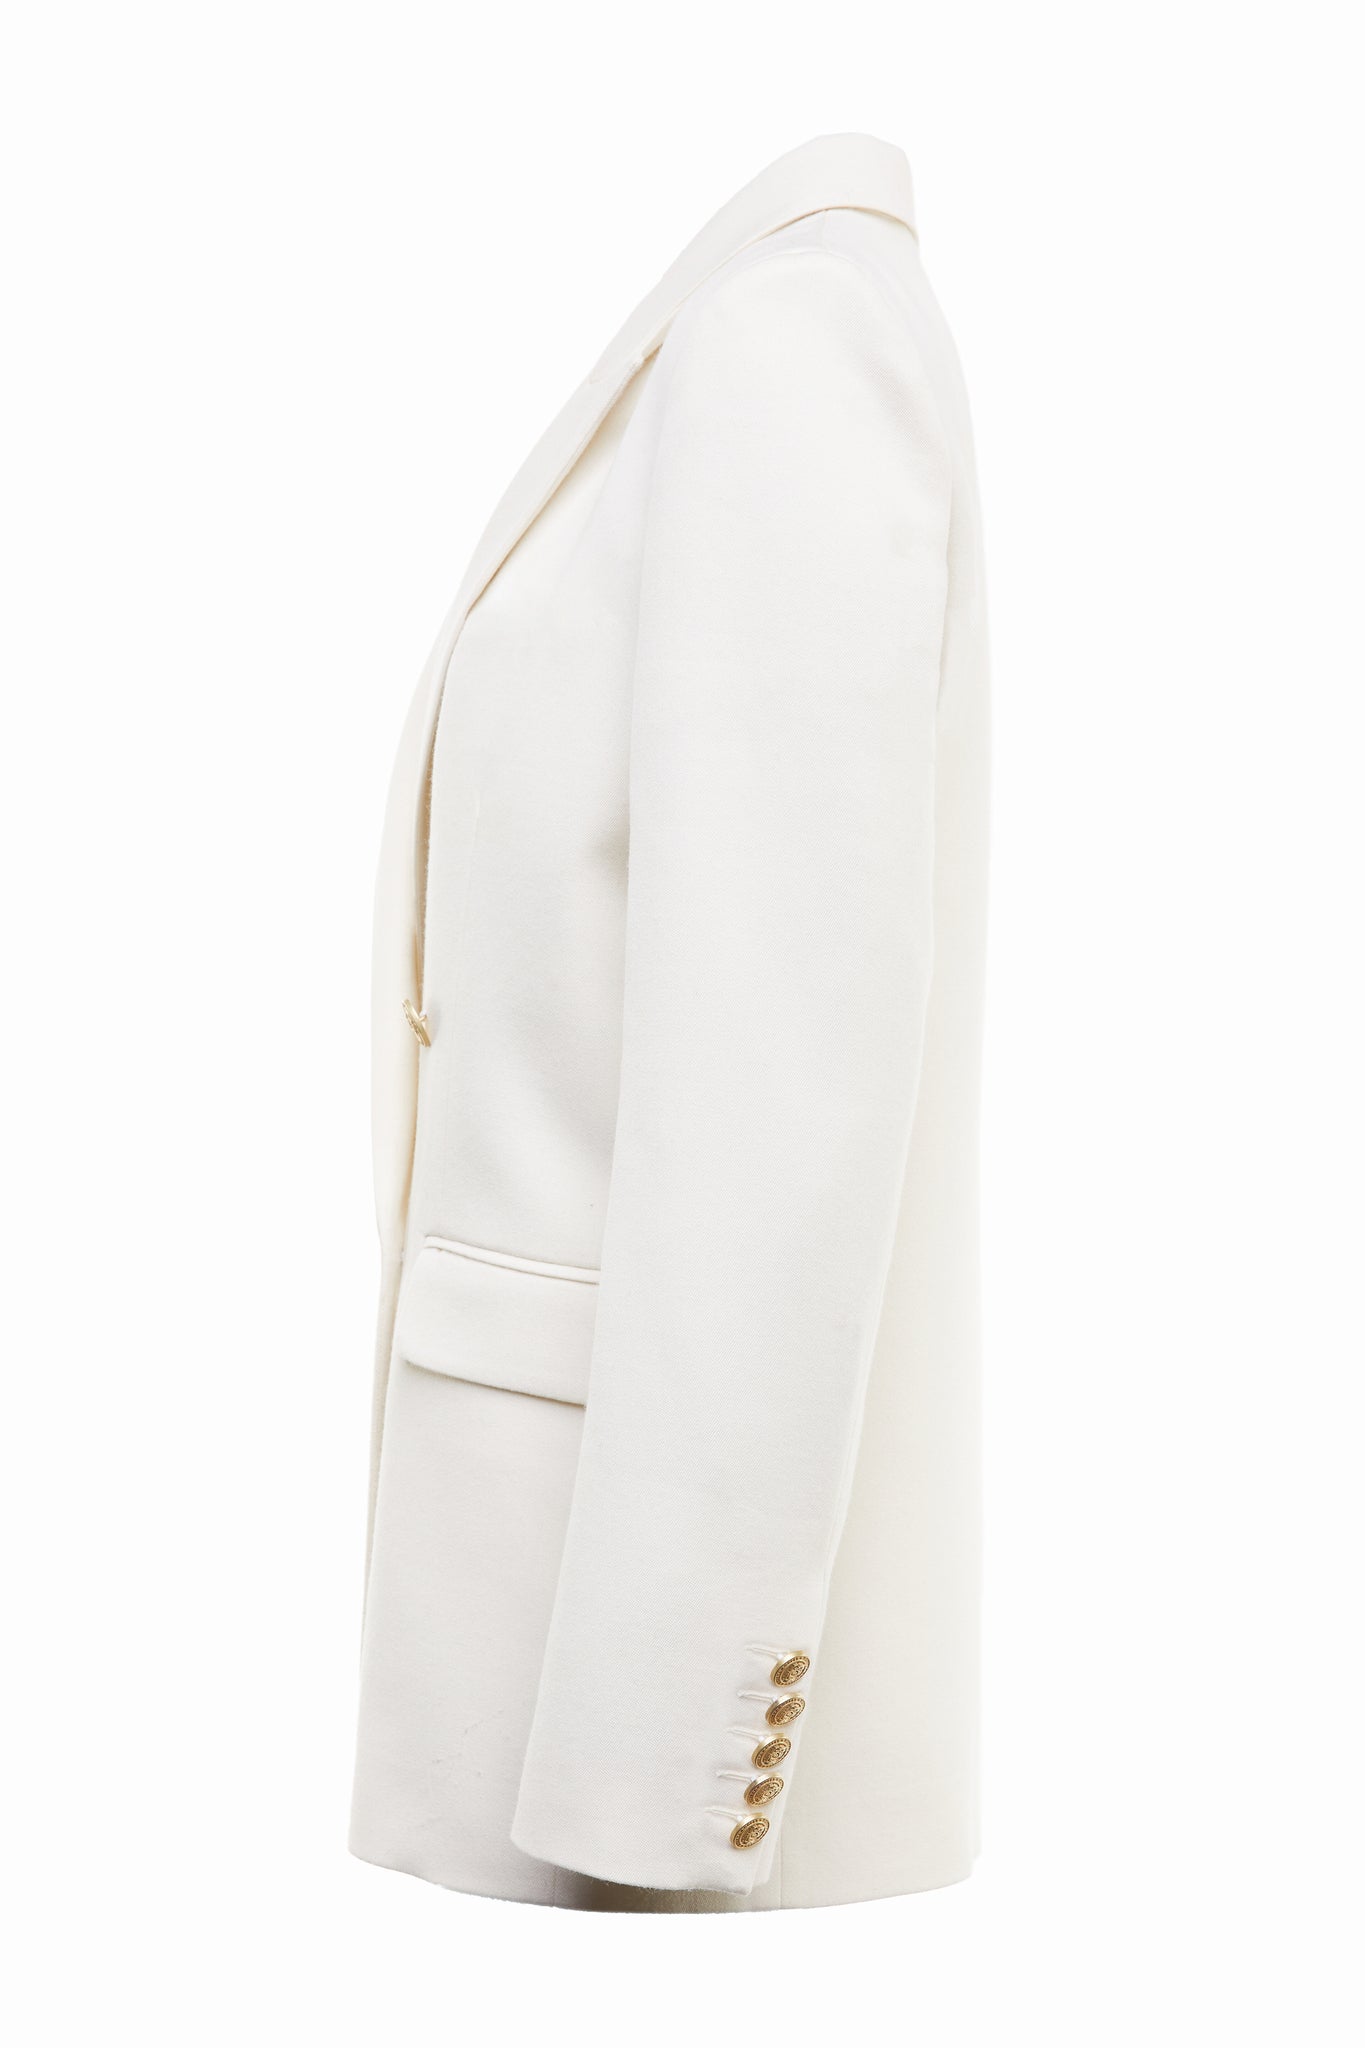 side of longline double breasted wool blazer in ivory tailor made in britain with relaxed fit welt pockets and gold buttons on the front and cuffs